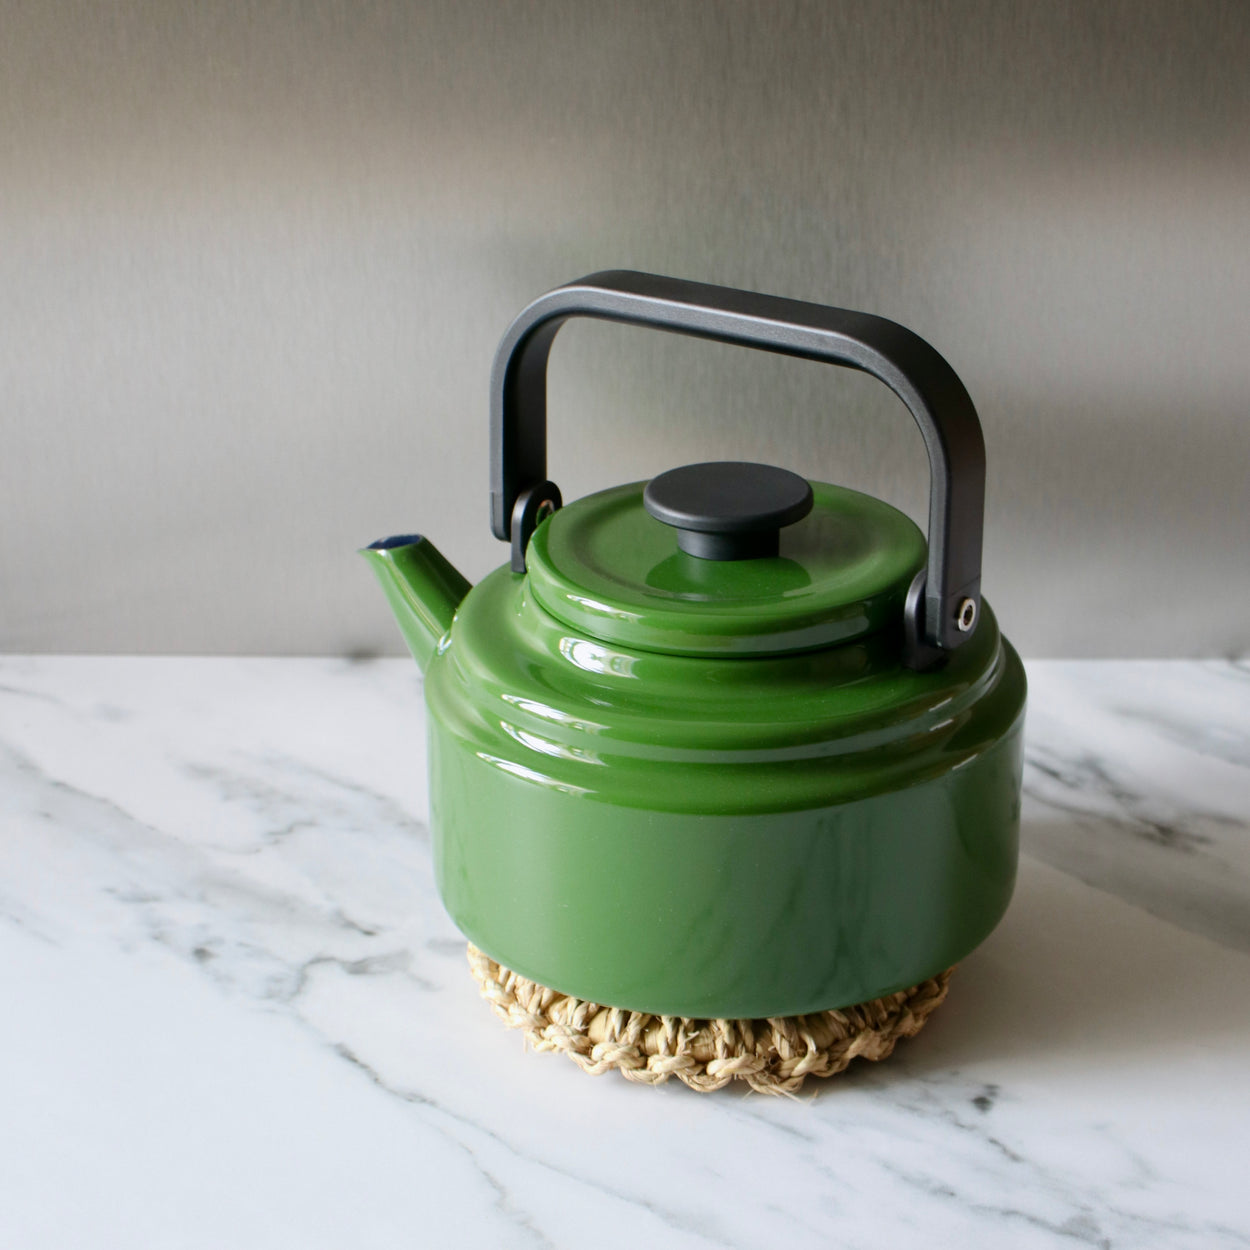 Japanese Woven Pot Holder on marble bench with green Amu kettle.